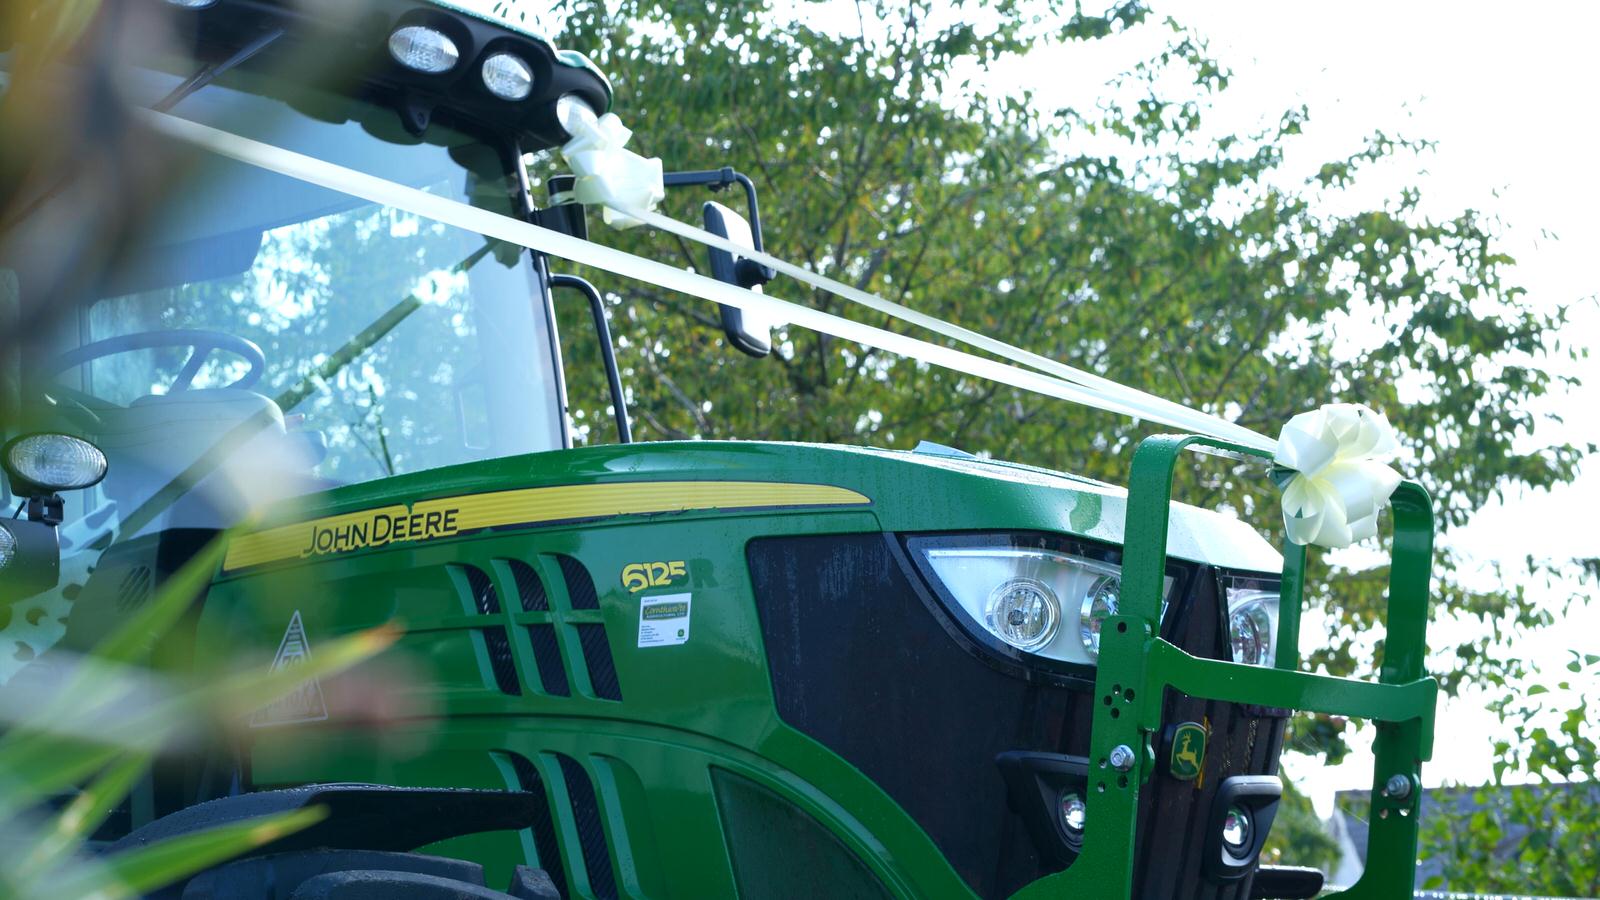 John Deere tractor with wedding ribbons on